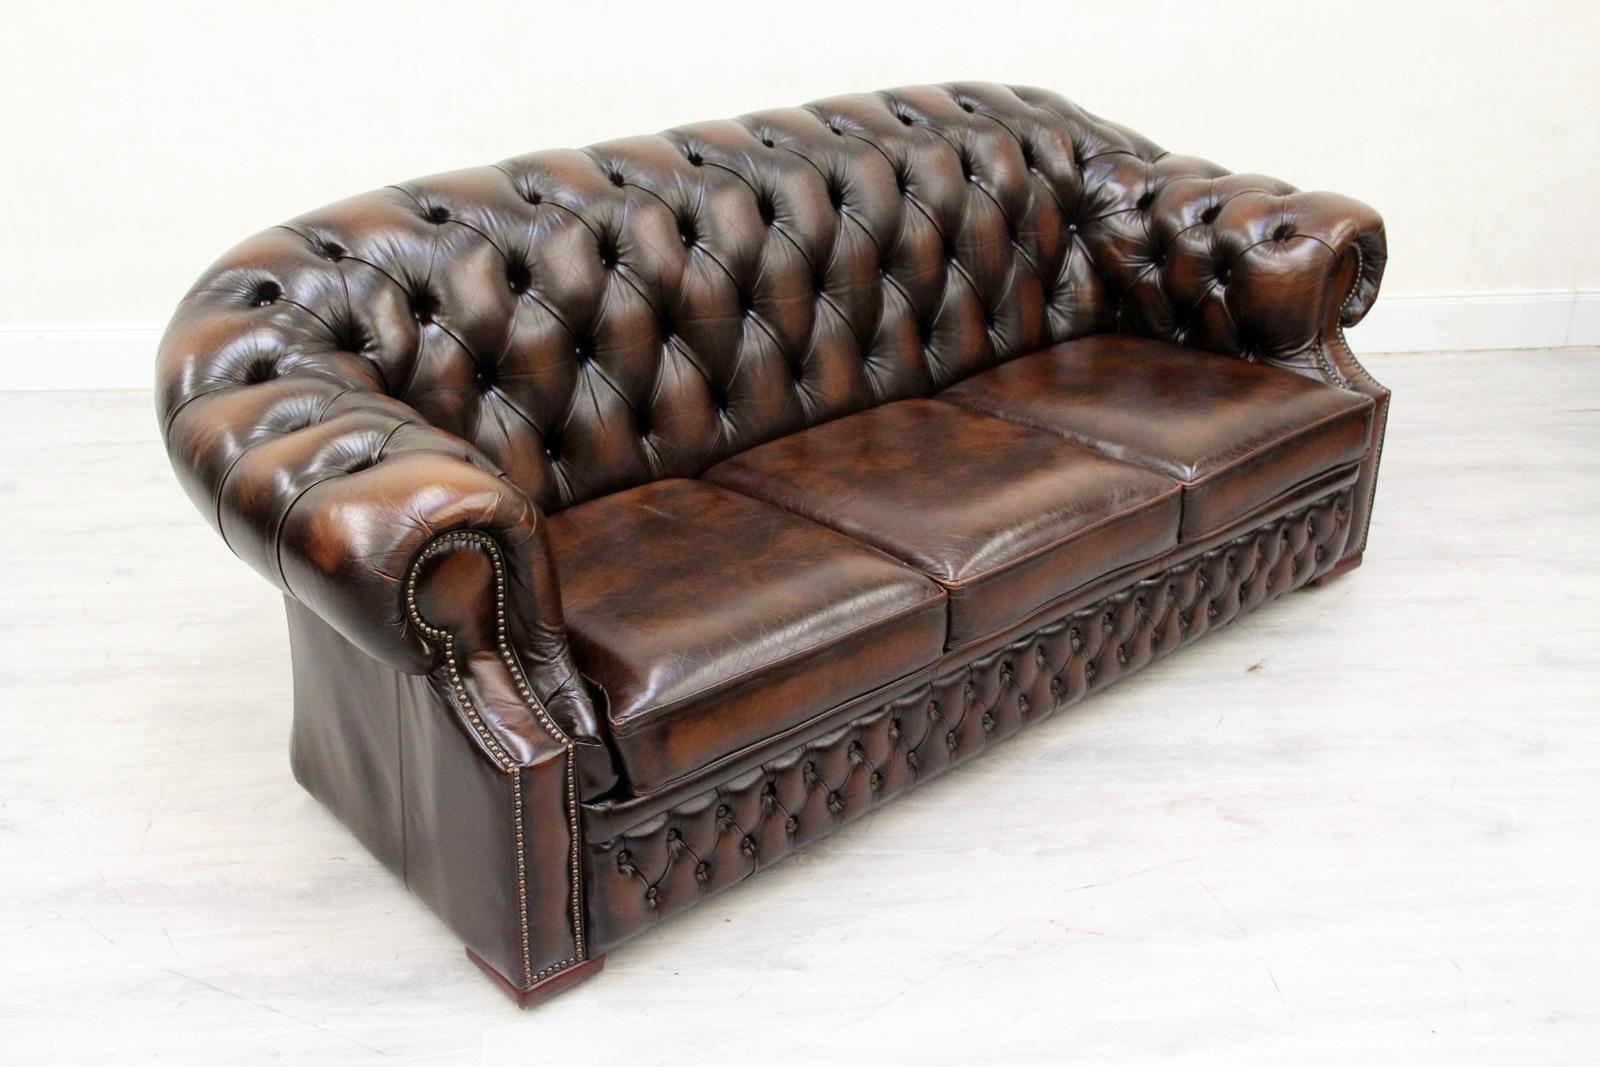 Chesterfield Centurion Sofa Leather Antique Vintage Couch, English For Sale 3